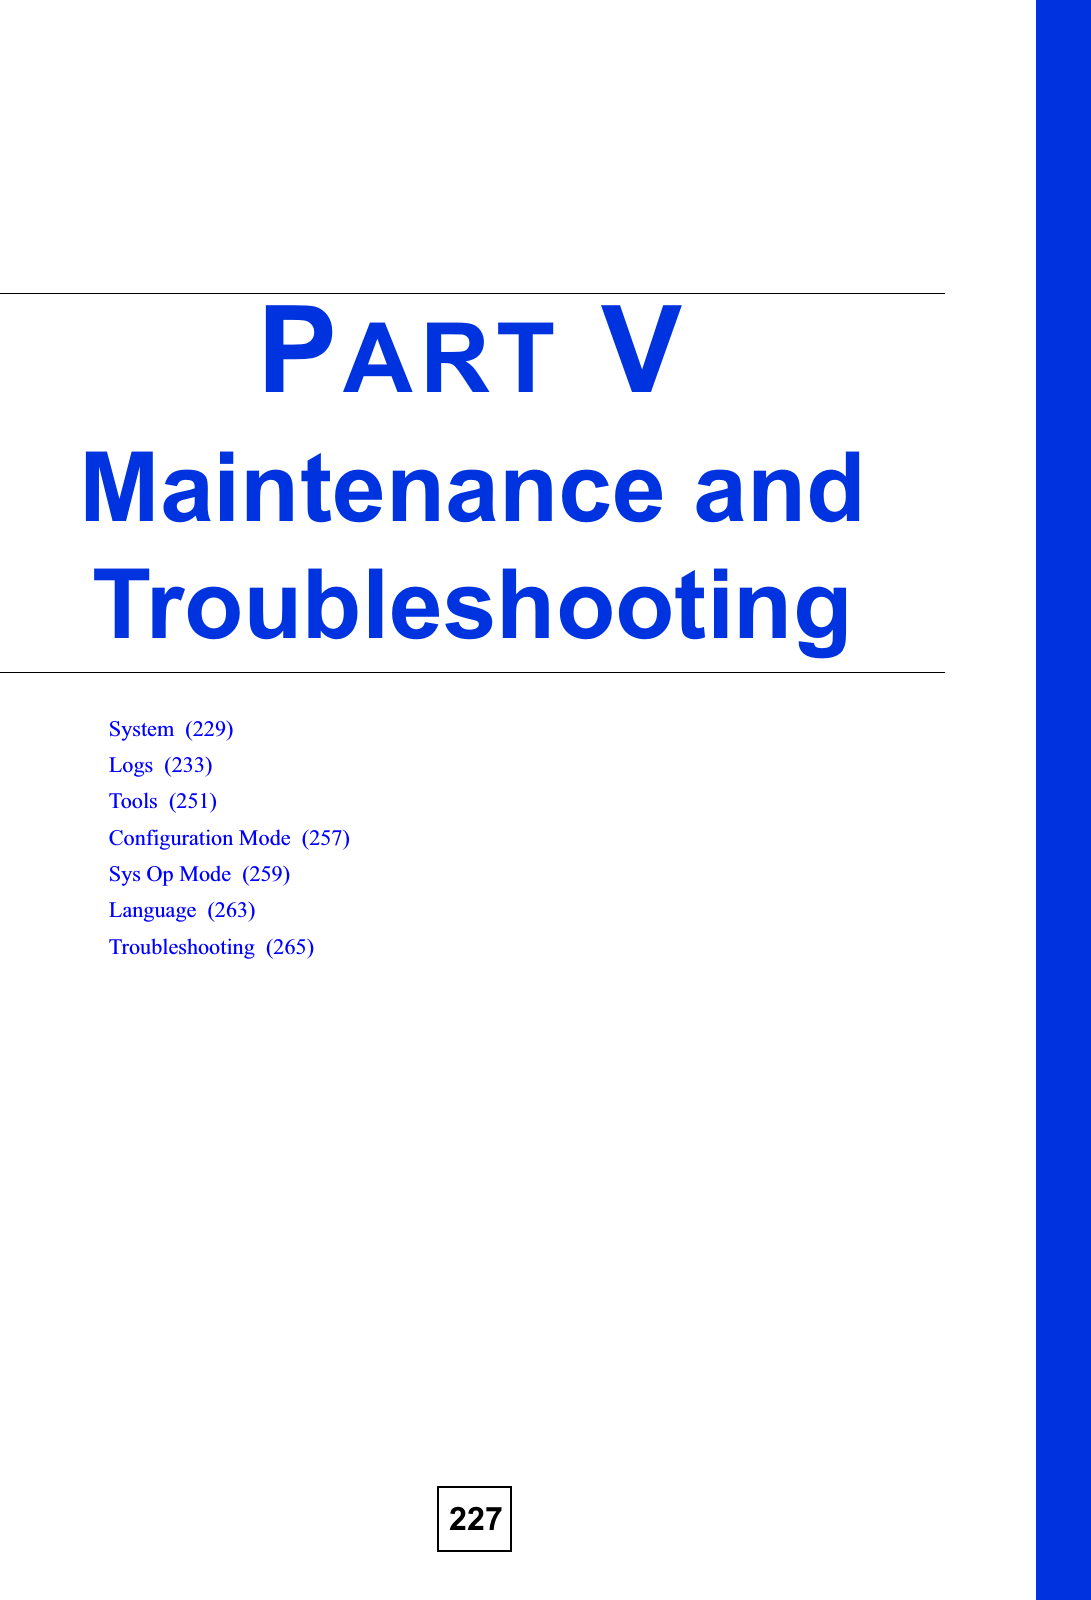 227PART VMaintenance and TroubleshootingSystem  (229)Logs  (233)Tools  (251)Configuration Mode  (257)Sys Op Mode  (259)Language  (263)Troubleshooting  (265)